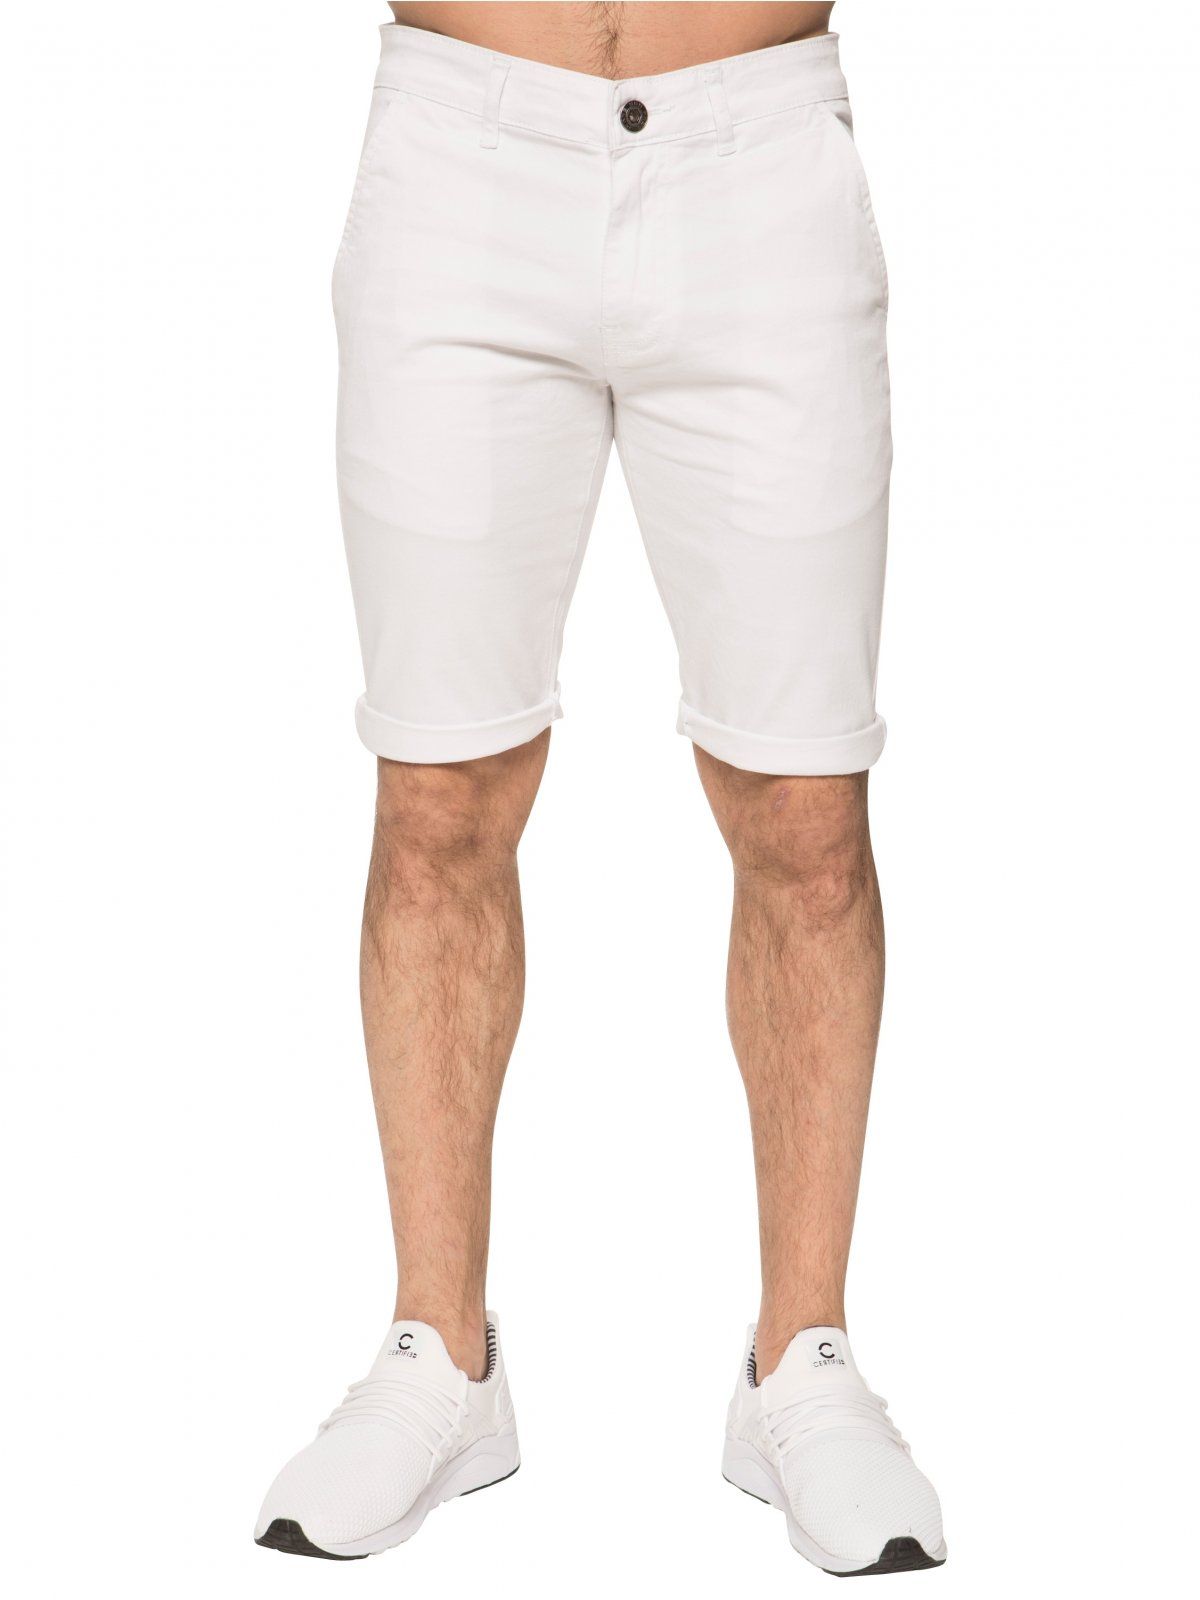 Whatever your plans for the summer, you cant go wrong with the understated style of Enzo chino shorts. Tailored in red cotton blend fabric with a zip fly, belt loops, narrow cuffed hems, branded buttons and rivets and a PU label at the waistband, this versatile style looks great with a casual T-shirt or vest and can equally be dressed up with a button-down shirt for smarter occasions. With sizes up to waist 48, everyone can look their best this season.